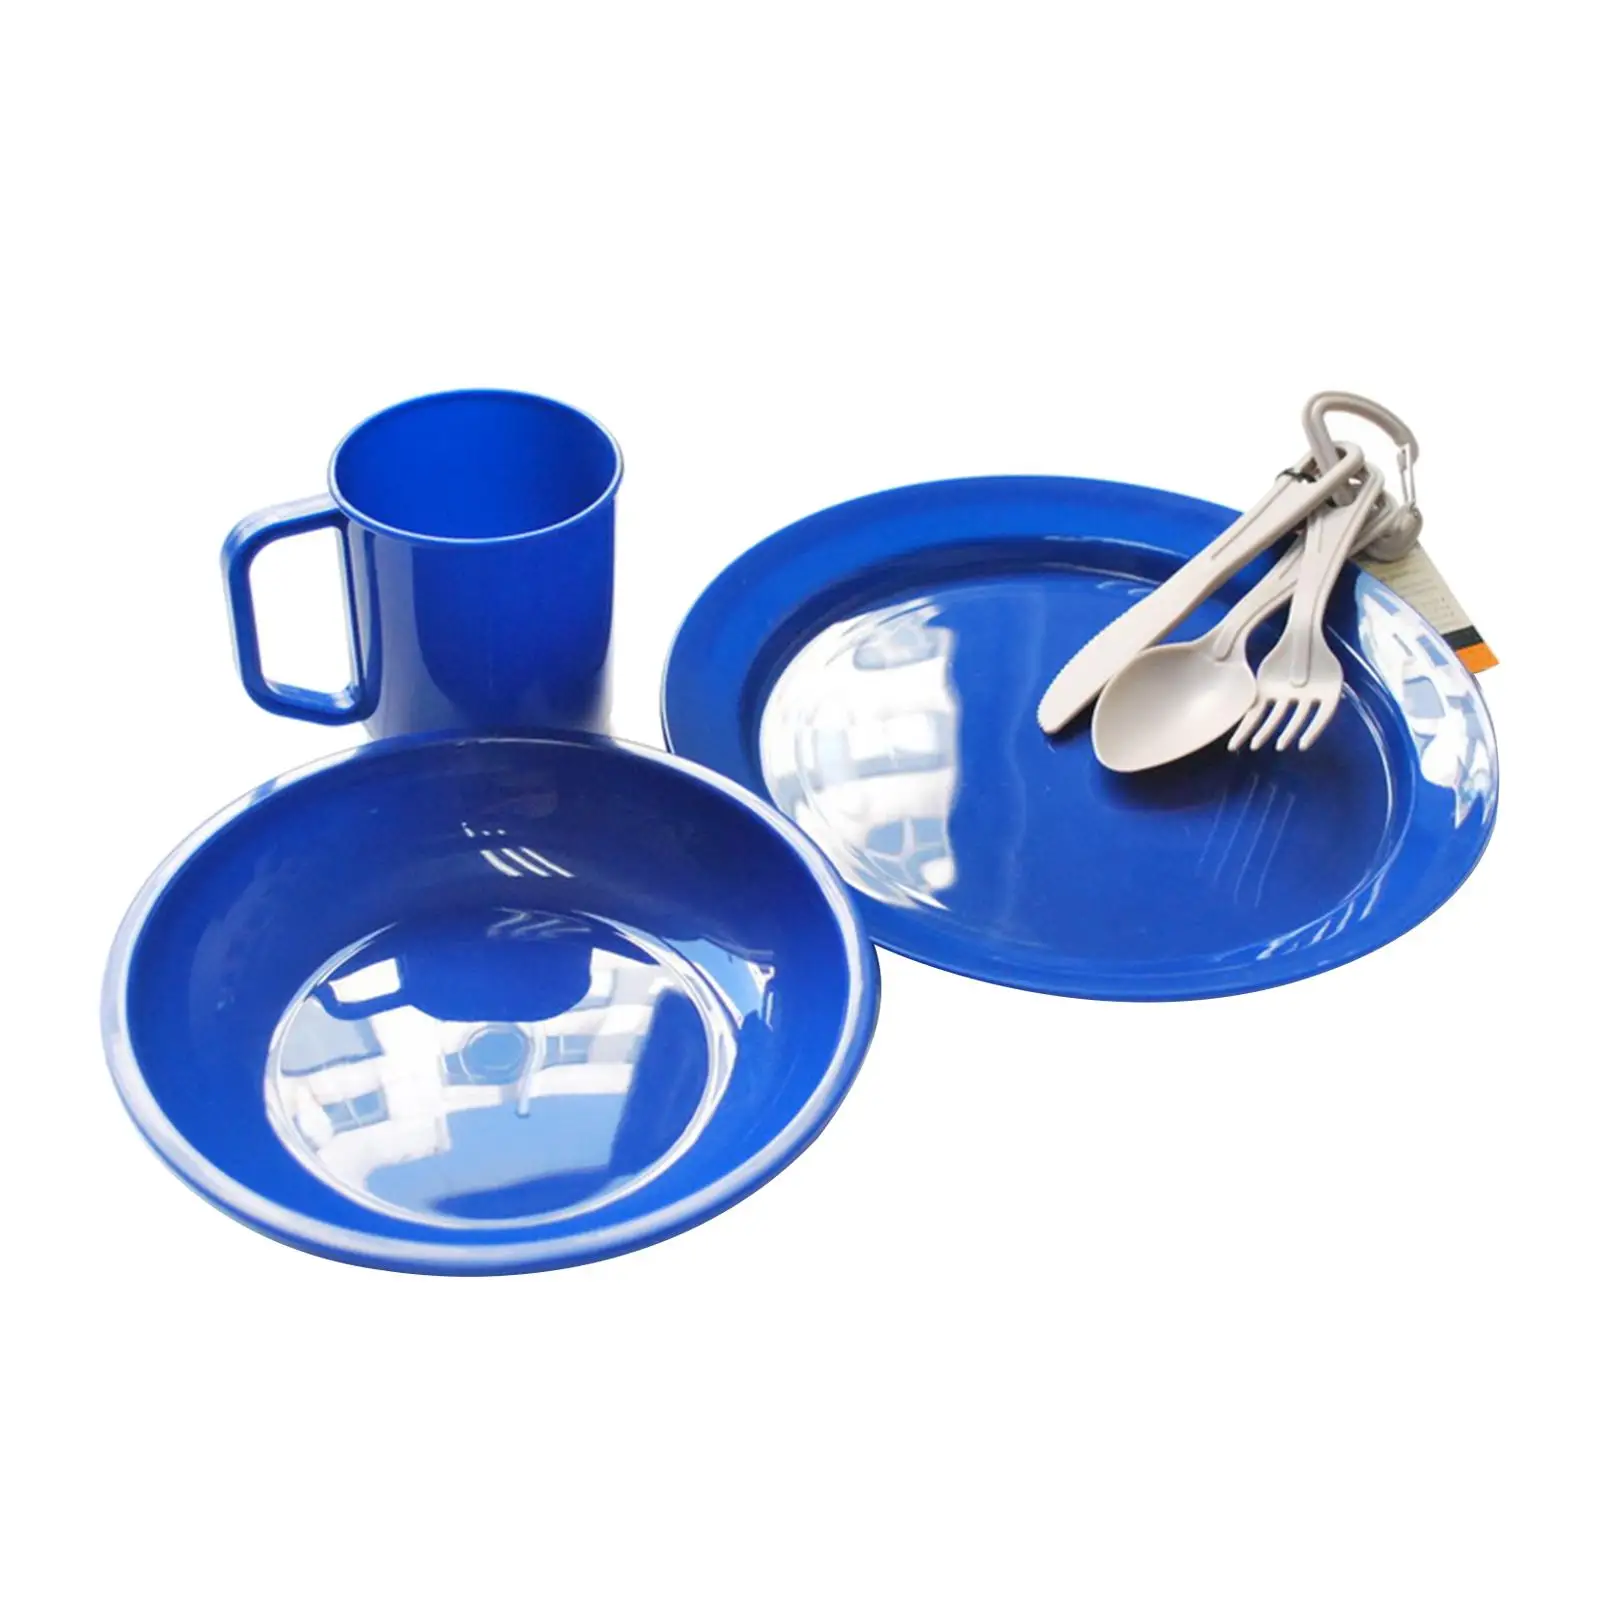 6x Outdoor Camping Tableware Set  Dish Bowl Cup Cooking Supplies for Travel Hiking